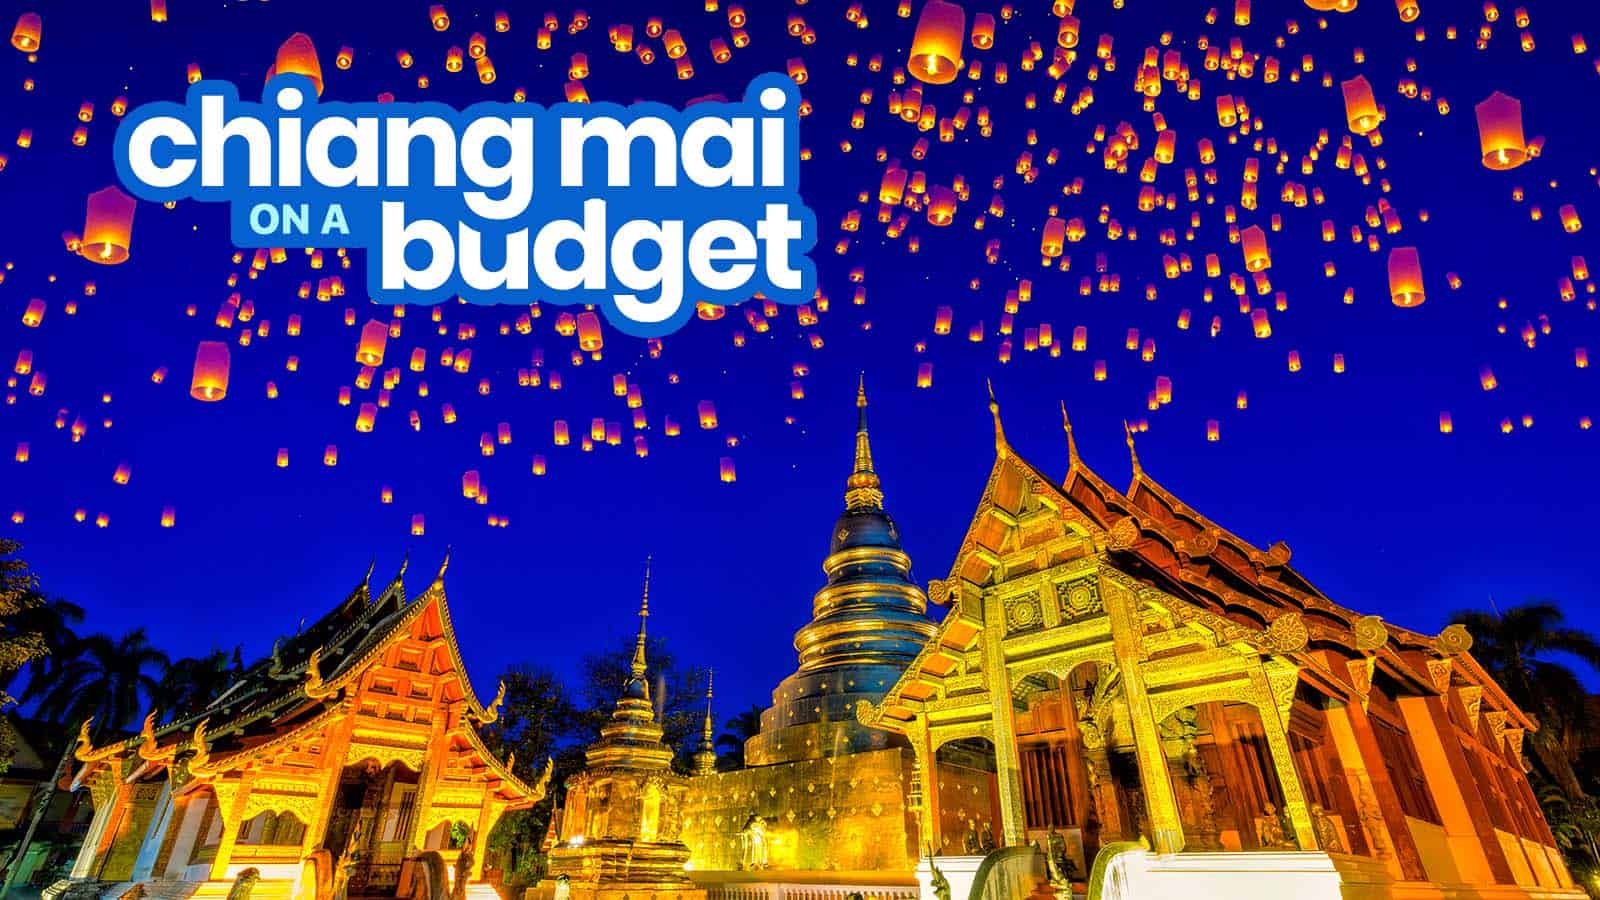 CHIANG MAI TRAVEL GUIDE: Budget, Itinerary, Things to Do